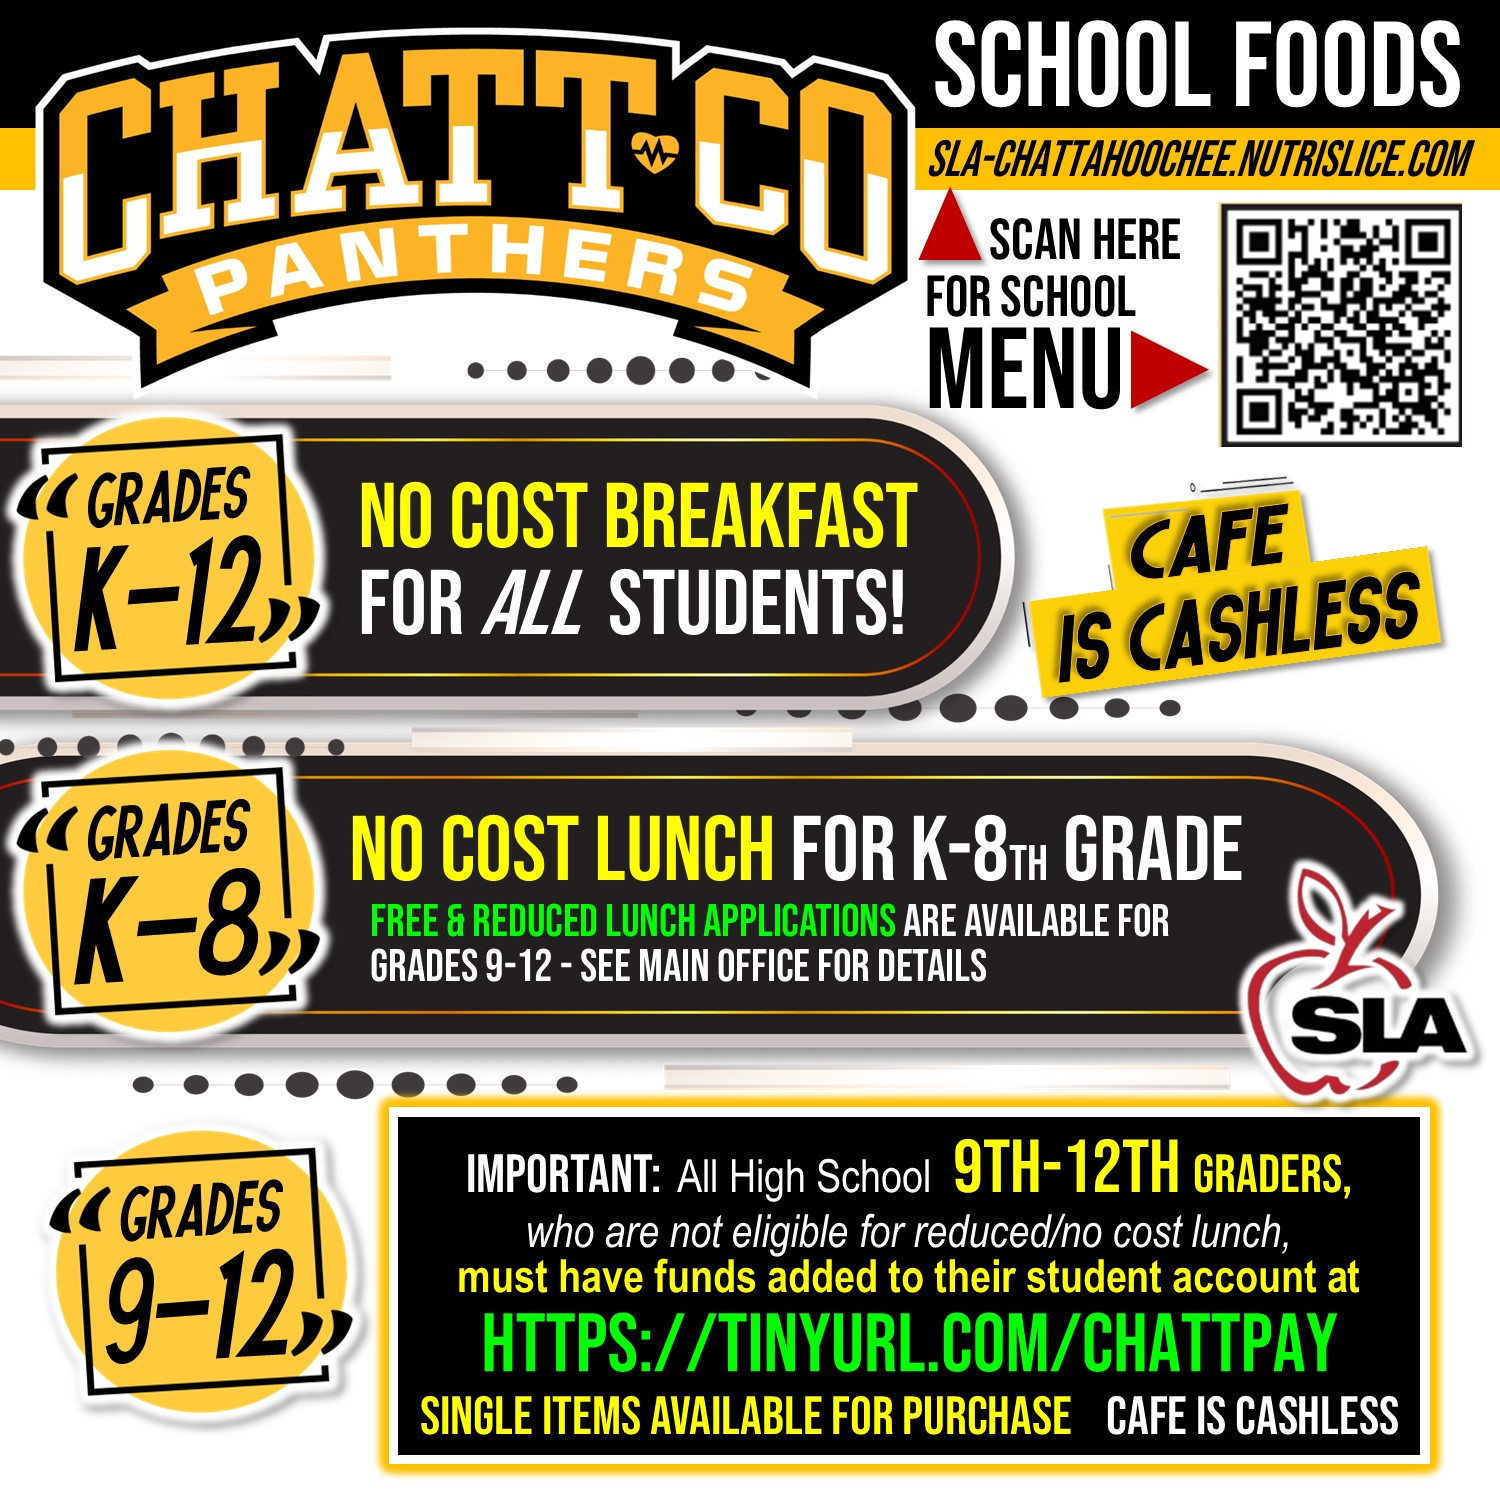 School Foods Scan Menu sla-chattahoochee.nutrislice.com K-12 No Cost Breakfast for ALL Students Café is Cashless  K-8 No Cost Lunch for K-8th Grade. Free and reduced lunch applications will be available for grades 9-12 at open house and the first week of school! Important Prior to Aug 8, all 9th-12th graders not eligible for reduced/no cost lunch must have funds added to their student account at HTTPS://chattco.powerschool.com/public/home.html   Single items available for purchase